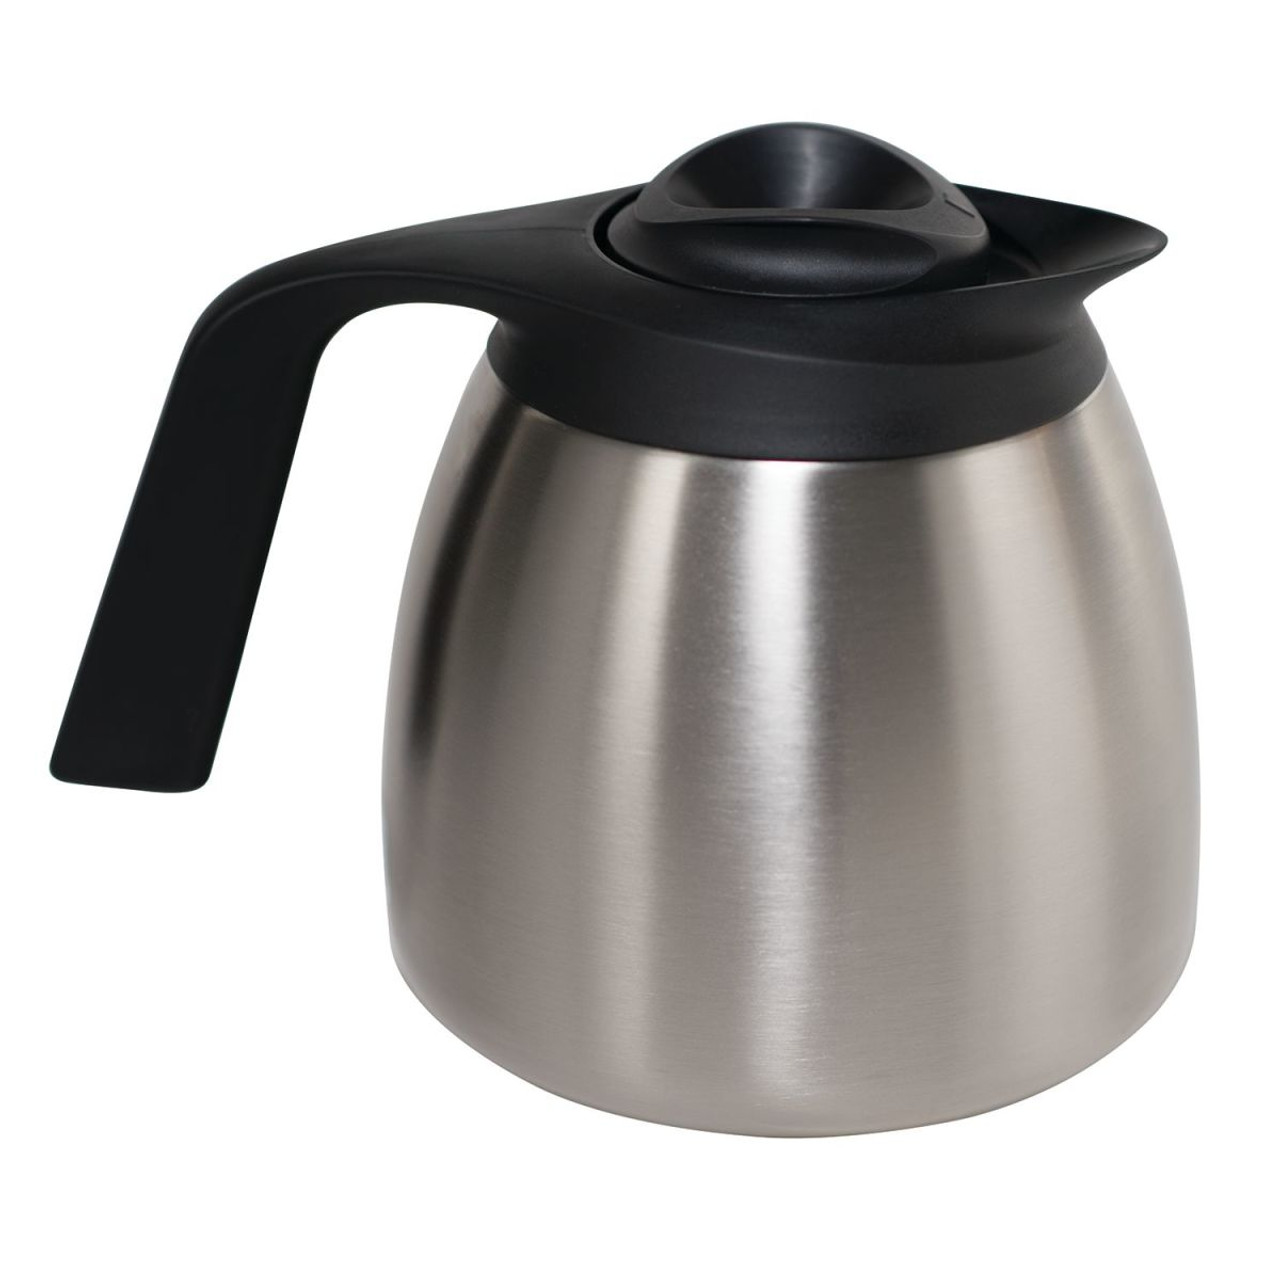 Bunn 64 oz. Stainless Steel Economy Thermal Carafe - Black Top-Chicken Pieces